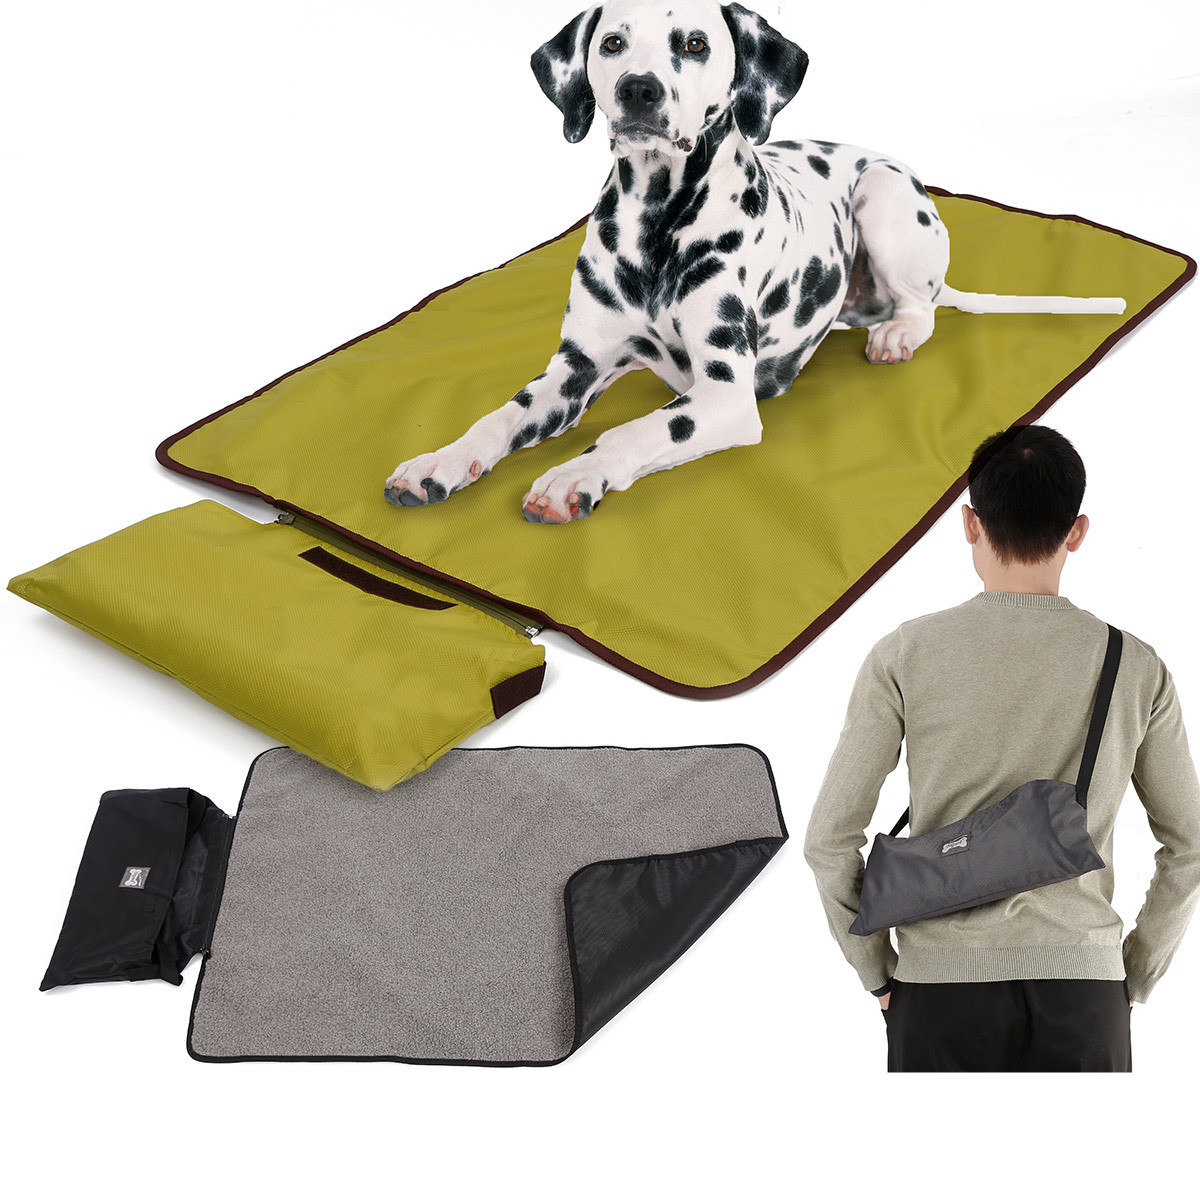 Are you tired of worrying about where your furry friend will rest while on outdoor adventures? Look no further! Our Portable Outdoor Dog Blanket is the perfect solution for all of your pet's outdoor needs. Made from high-quality, water-resistant materials, this blanket provides a comfortable and protective surface for your dog to rest on while camping, hiking, or picnicking. Its compact and lightweight design makes it easy to pack and transport.